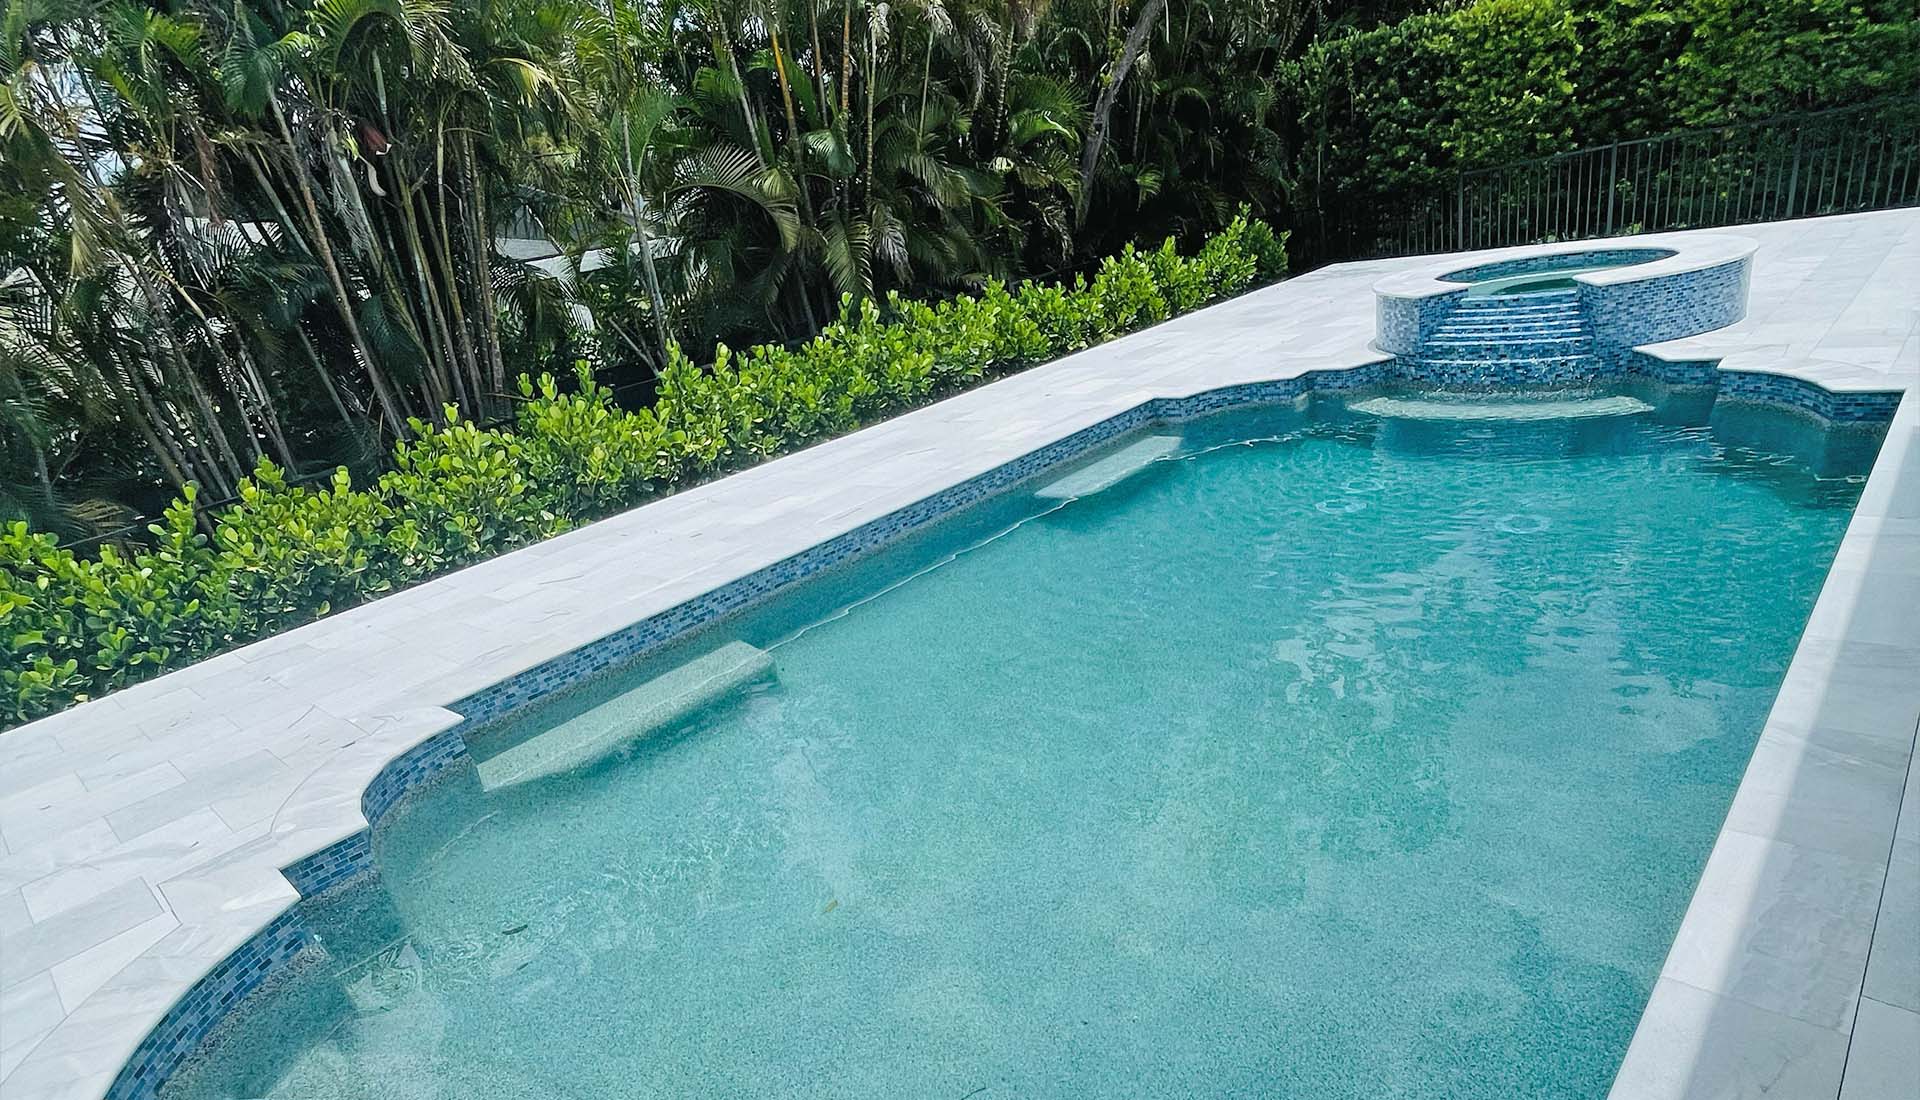 Tiered spillway spa in full pool and deck renovation by Pool and Deck Concepts, Naples, FL